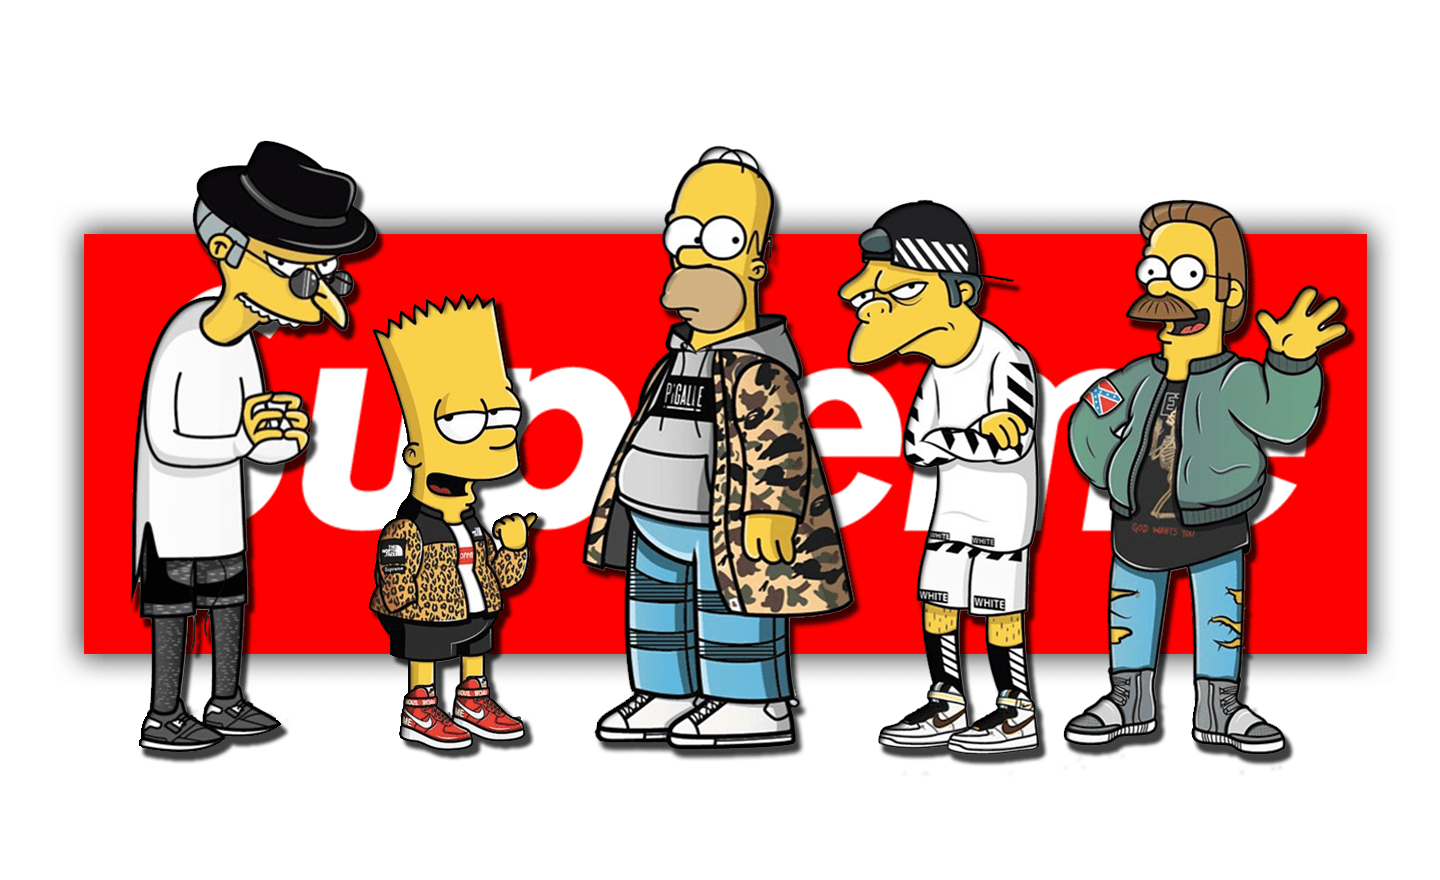 Simpsons Supreme wallpaper by IAMTHOR26  Download on ZEDGE  6ee9